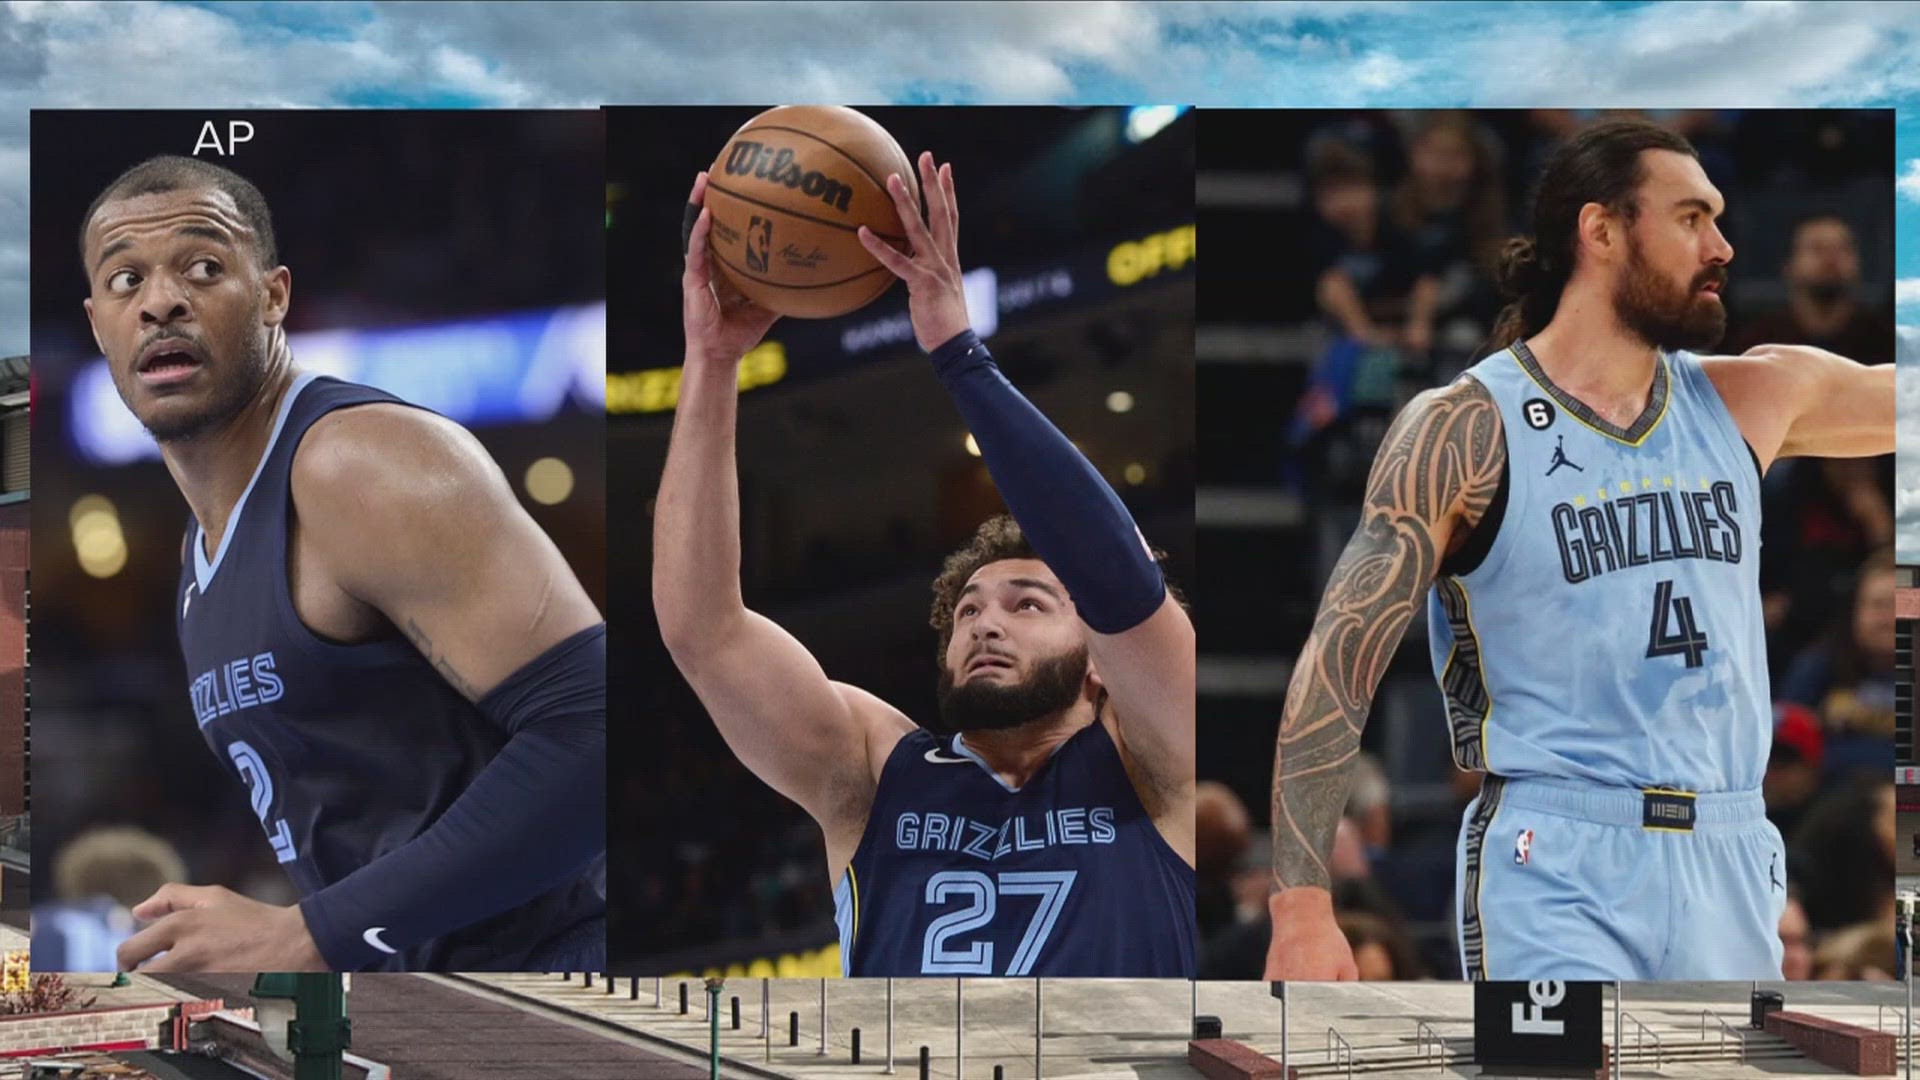 We are now past the NBA trade deadline, and the Grizzlies’ roster looks different than it did eight days ago.